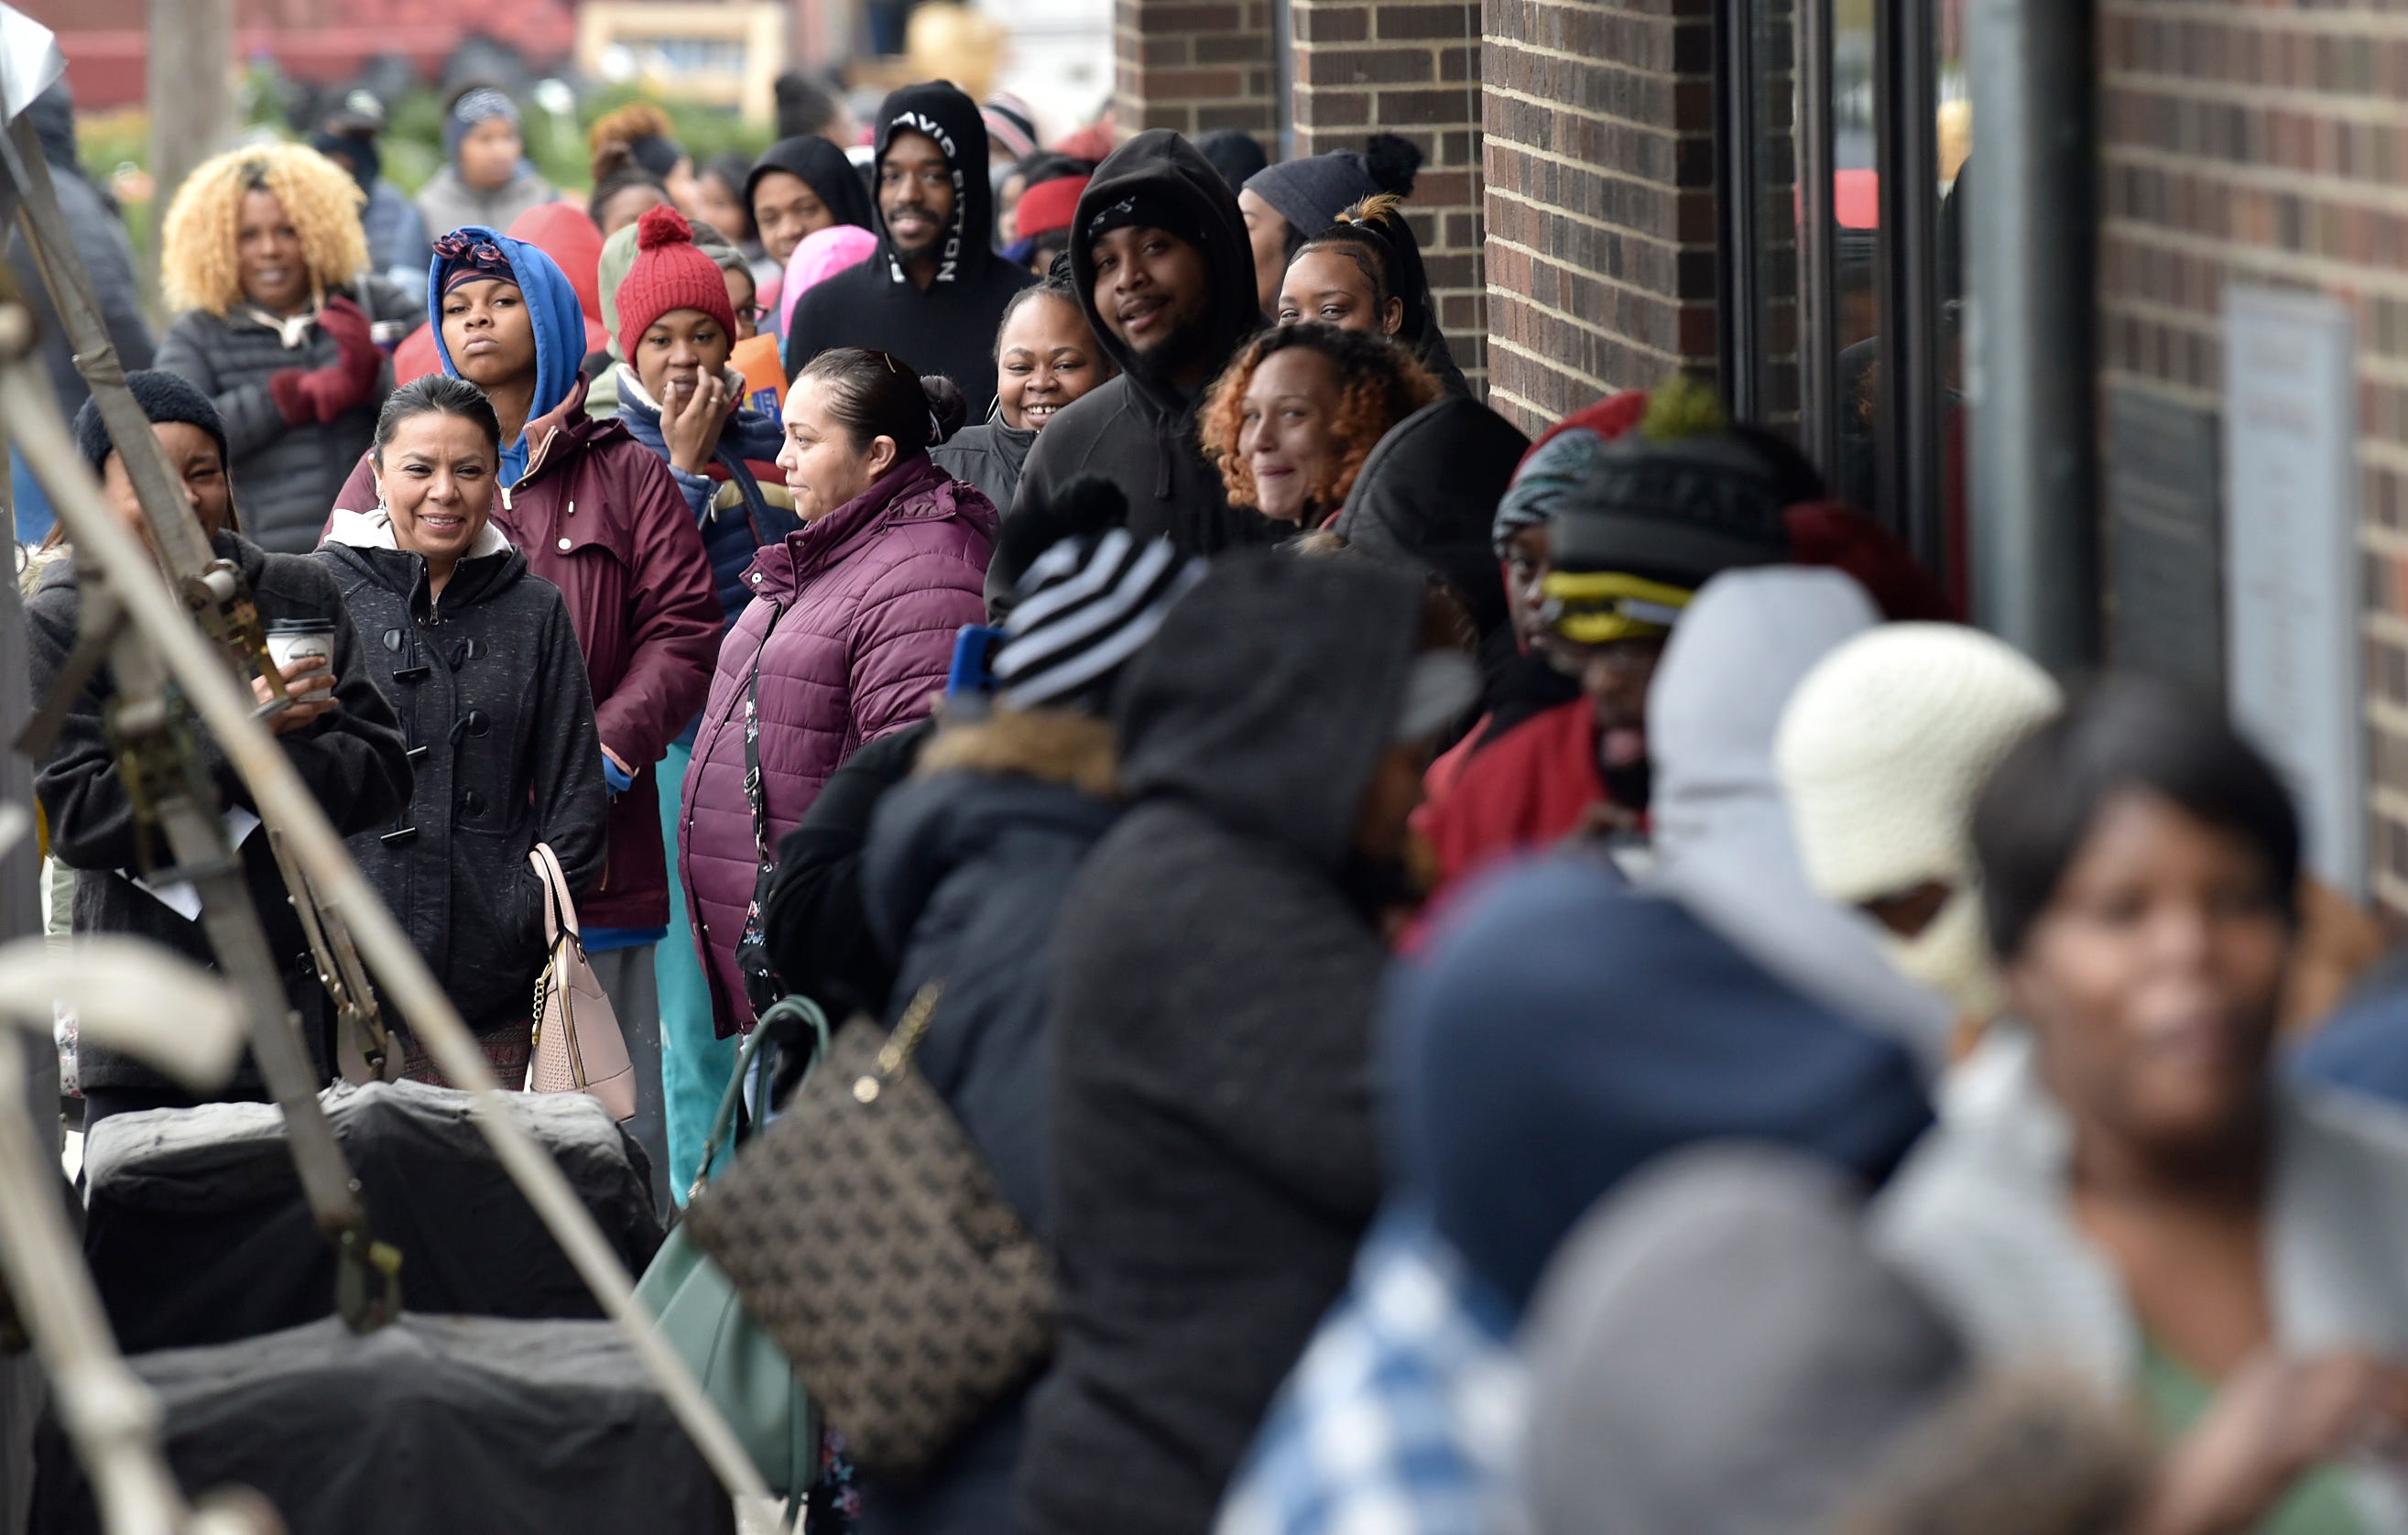 About 500 pre-registered and invited families line up around Eastern Market's Shed 5 as they wait to enter and shop for Christmas presents during the U.S. Marine  CorpsToys for Tots program, Thursday, Dec. 20, 2018. Gifts are donated by Detroit Pistons owner Tom Gores and his wife, Holly.